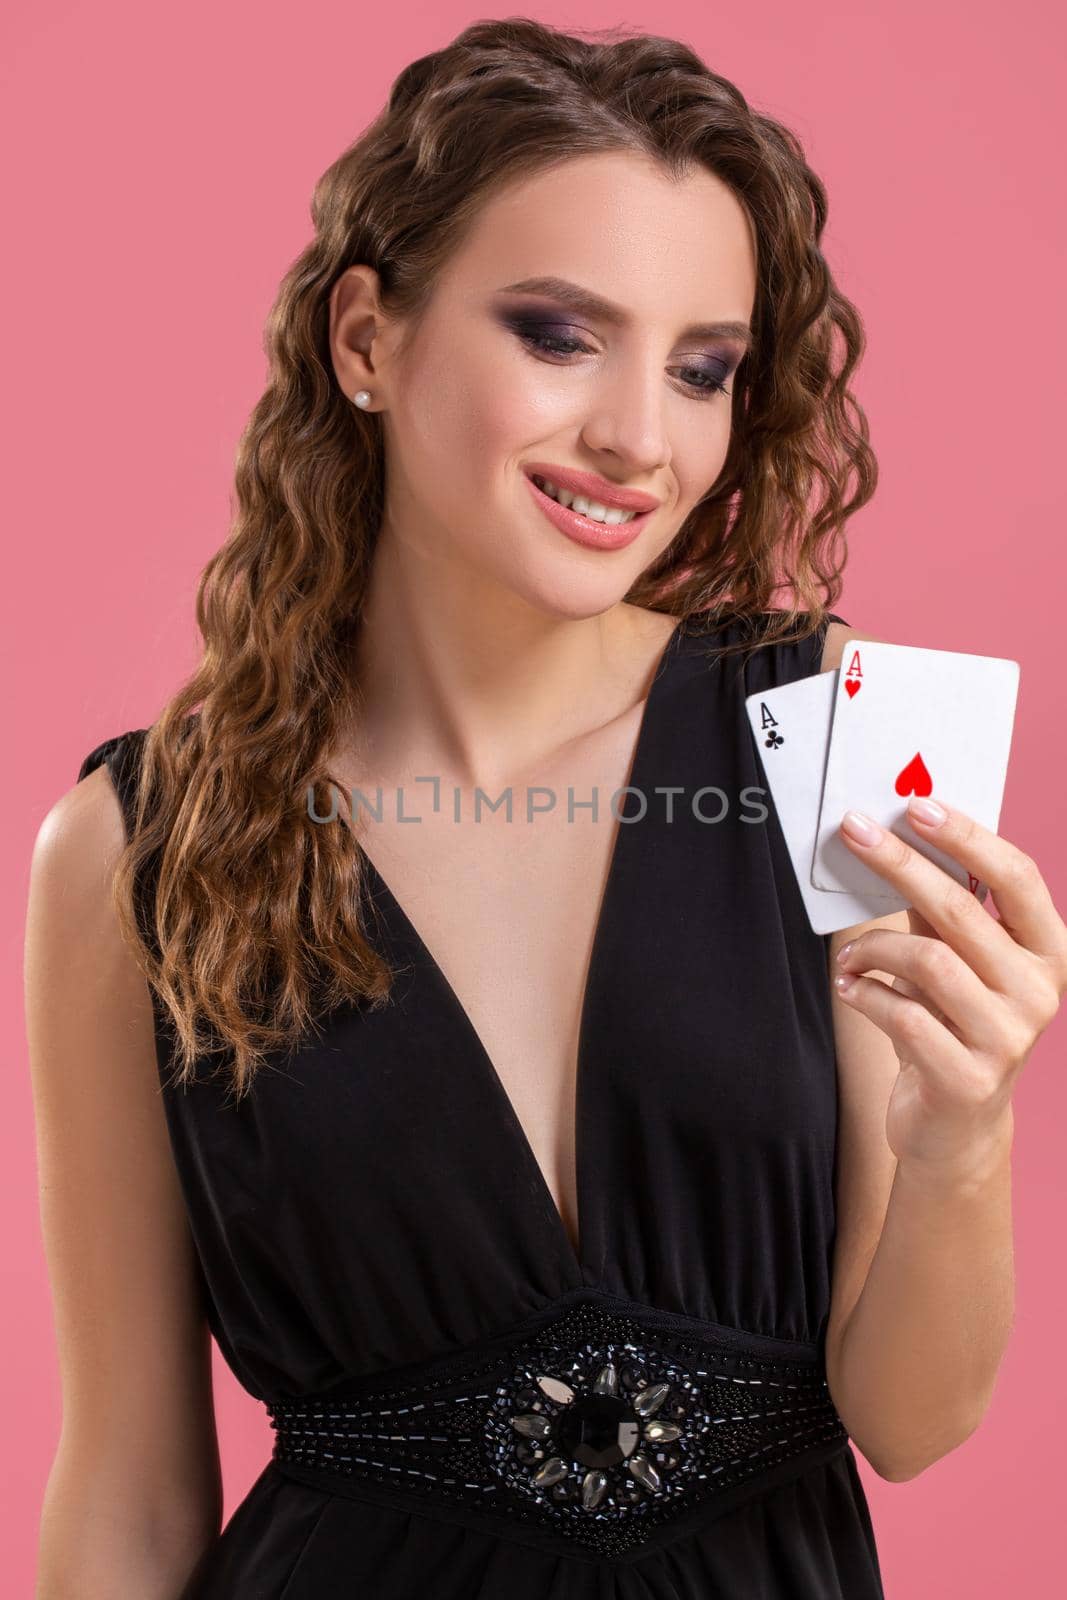 Young woman in black dress holding two aces in hand against on pink background. Studio shot